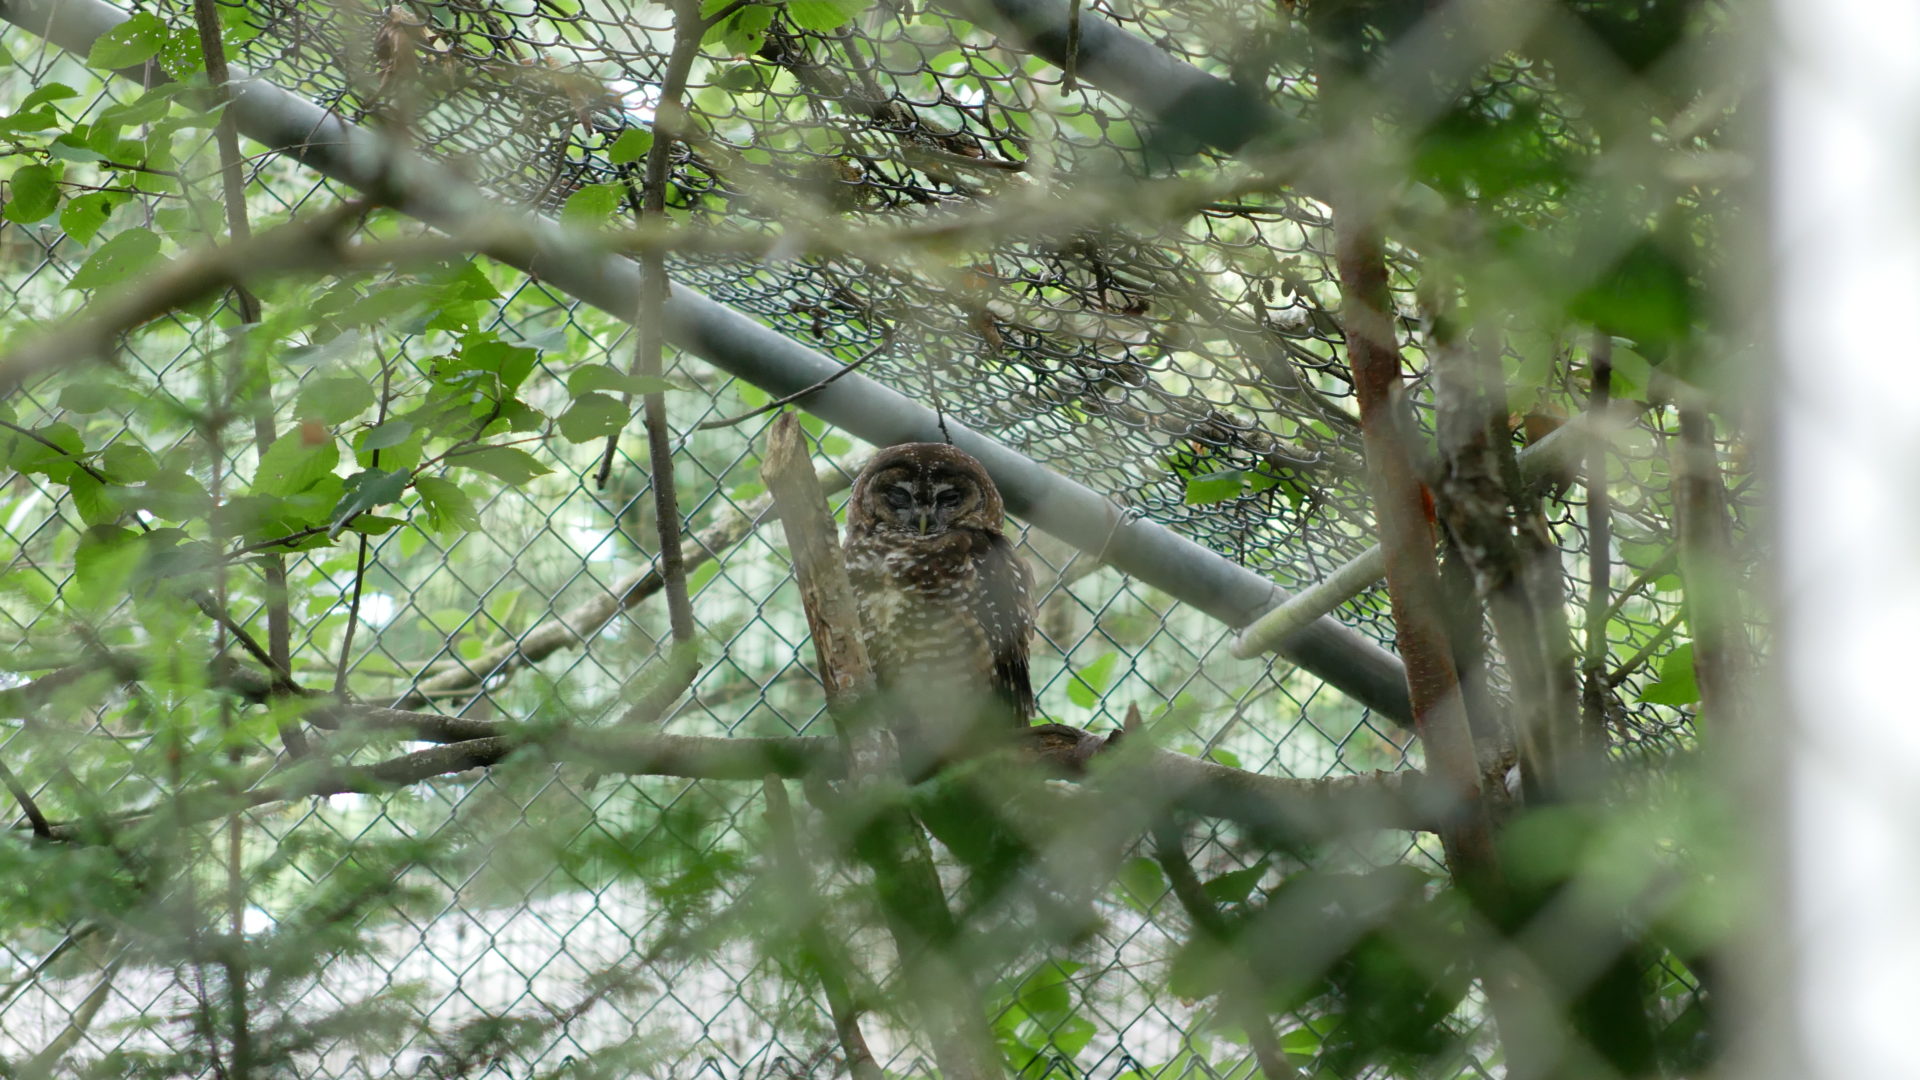 Oregon, a northern spotted owl, in his aviary at the breeding facility. Photo: Carol Linnitt / The Narwhal